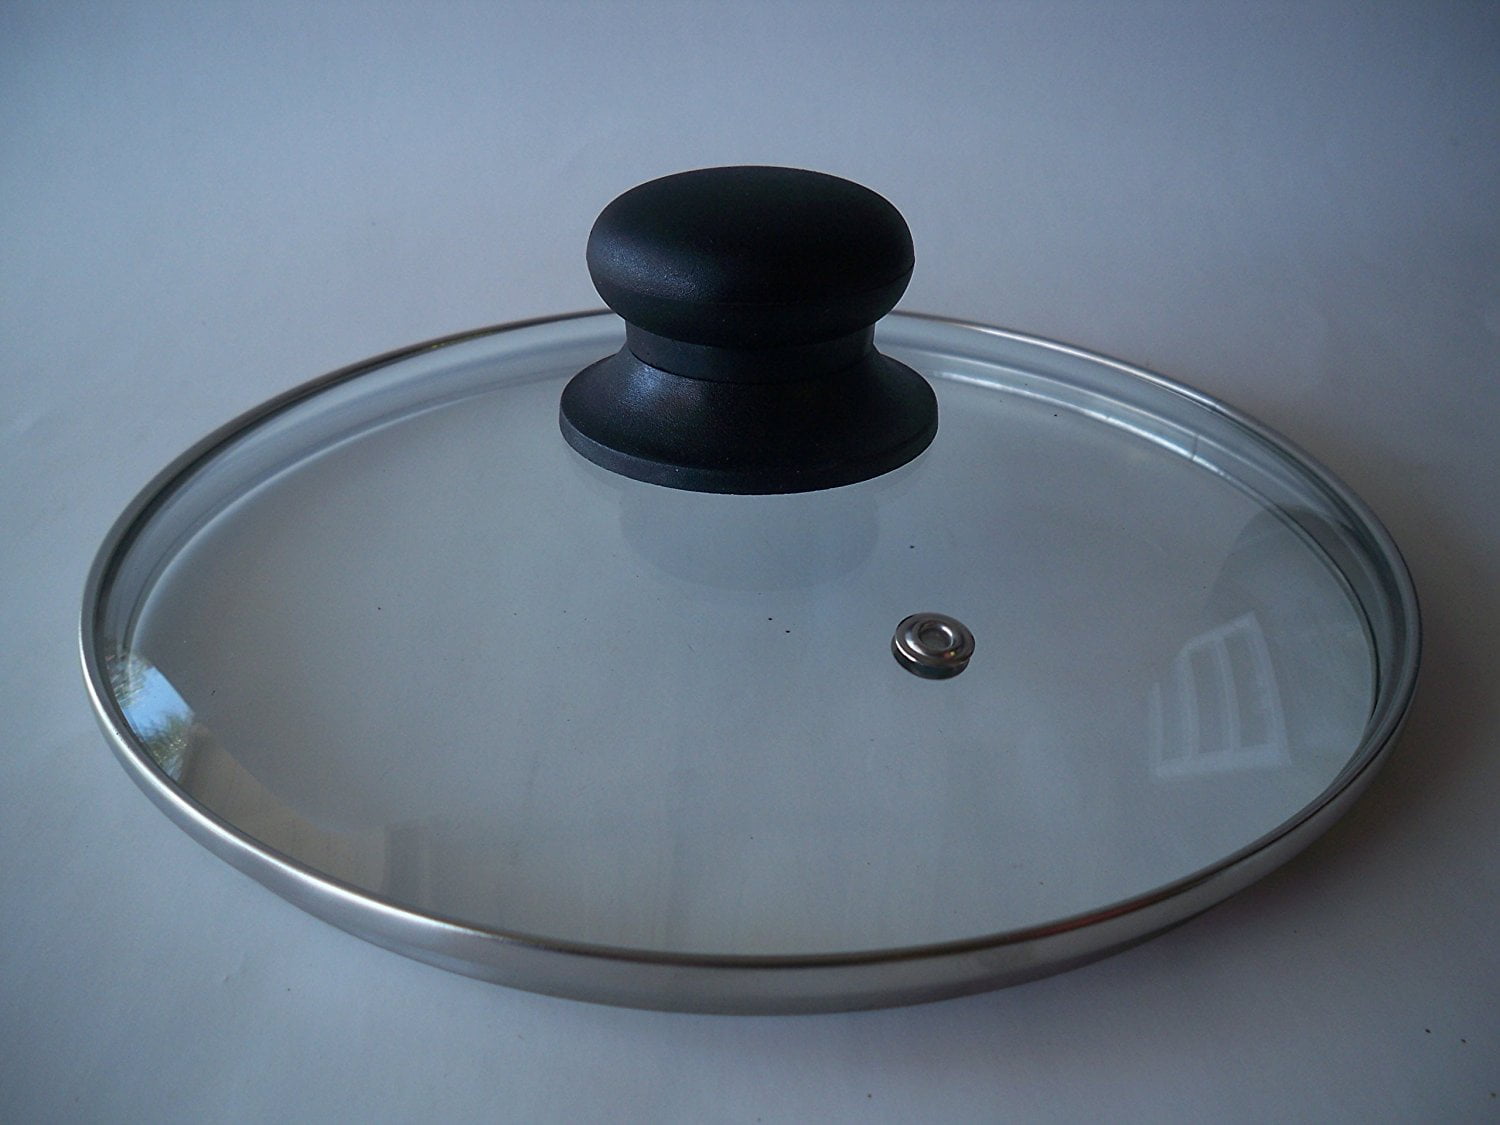 tempered-glass-lid-for-pot-pans-with-vent-hole-20-cm-walmart